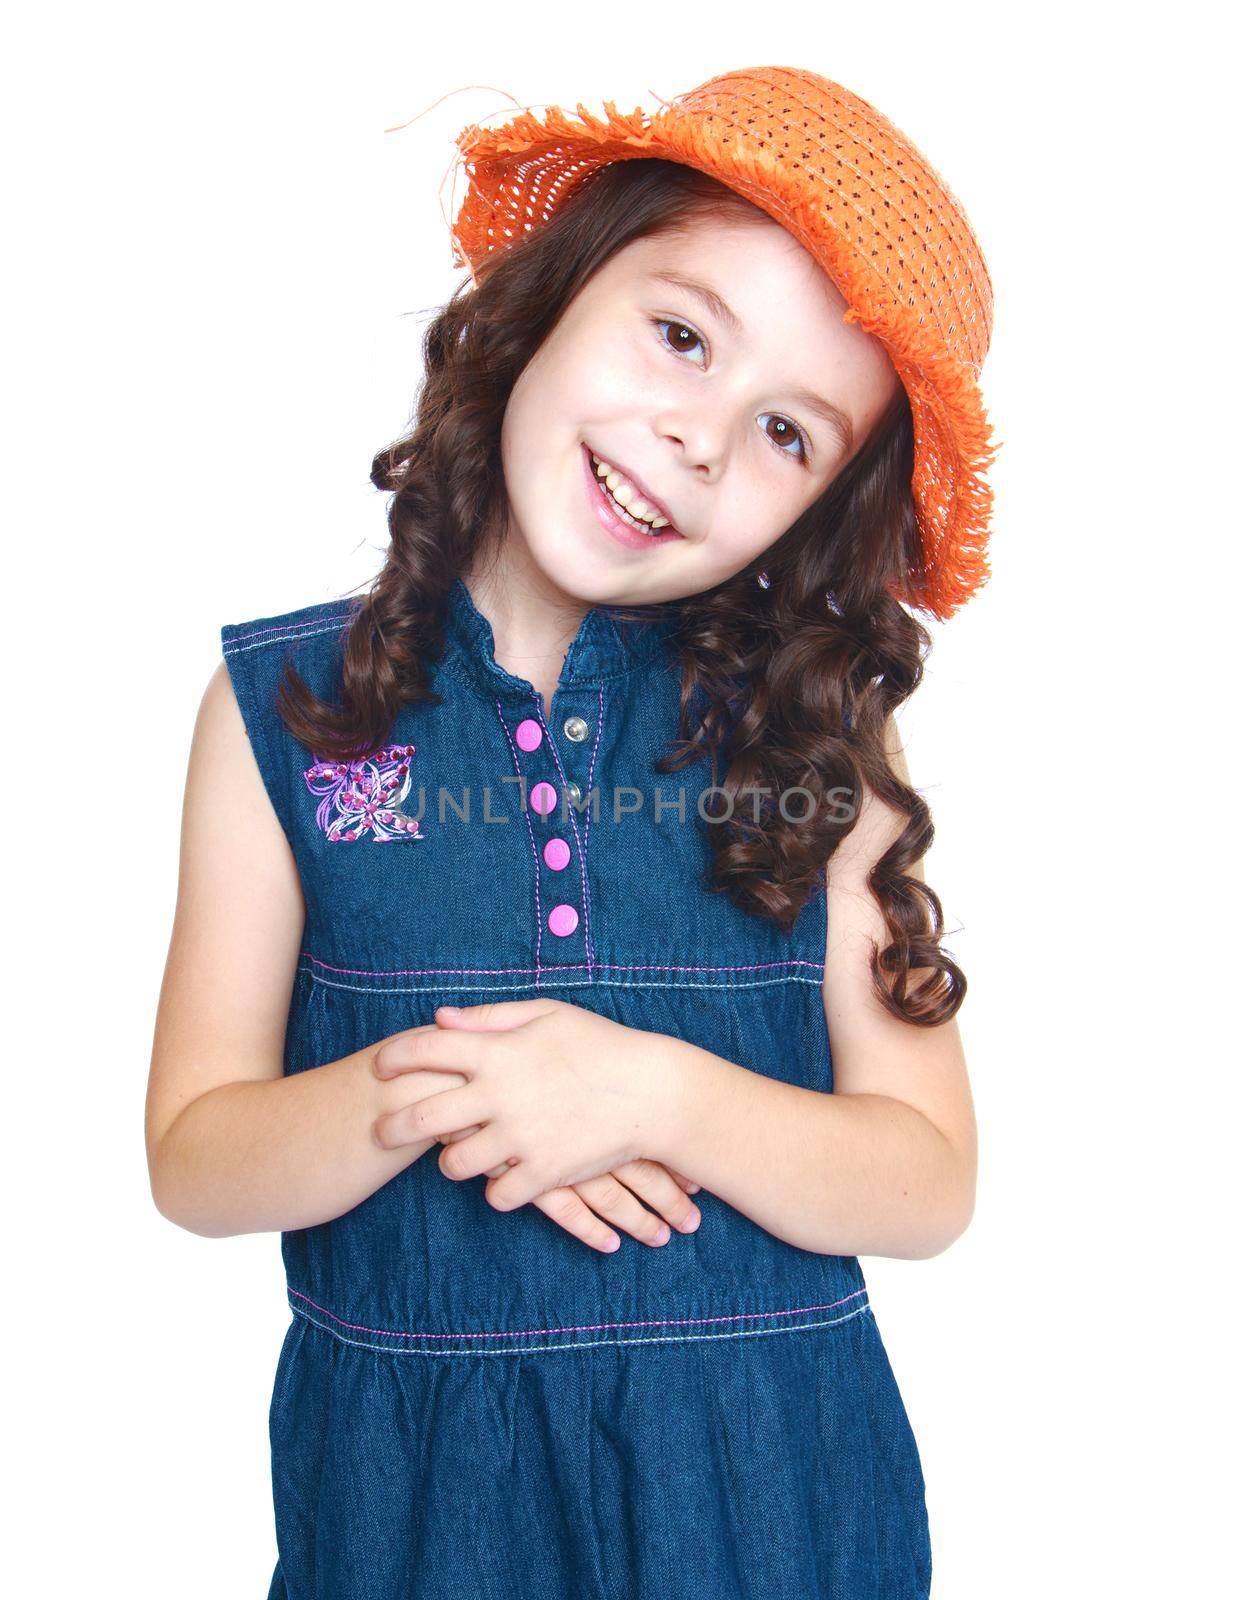 portrait of a charming young girl in a hat.Isolated on white background portrait.